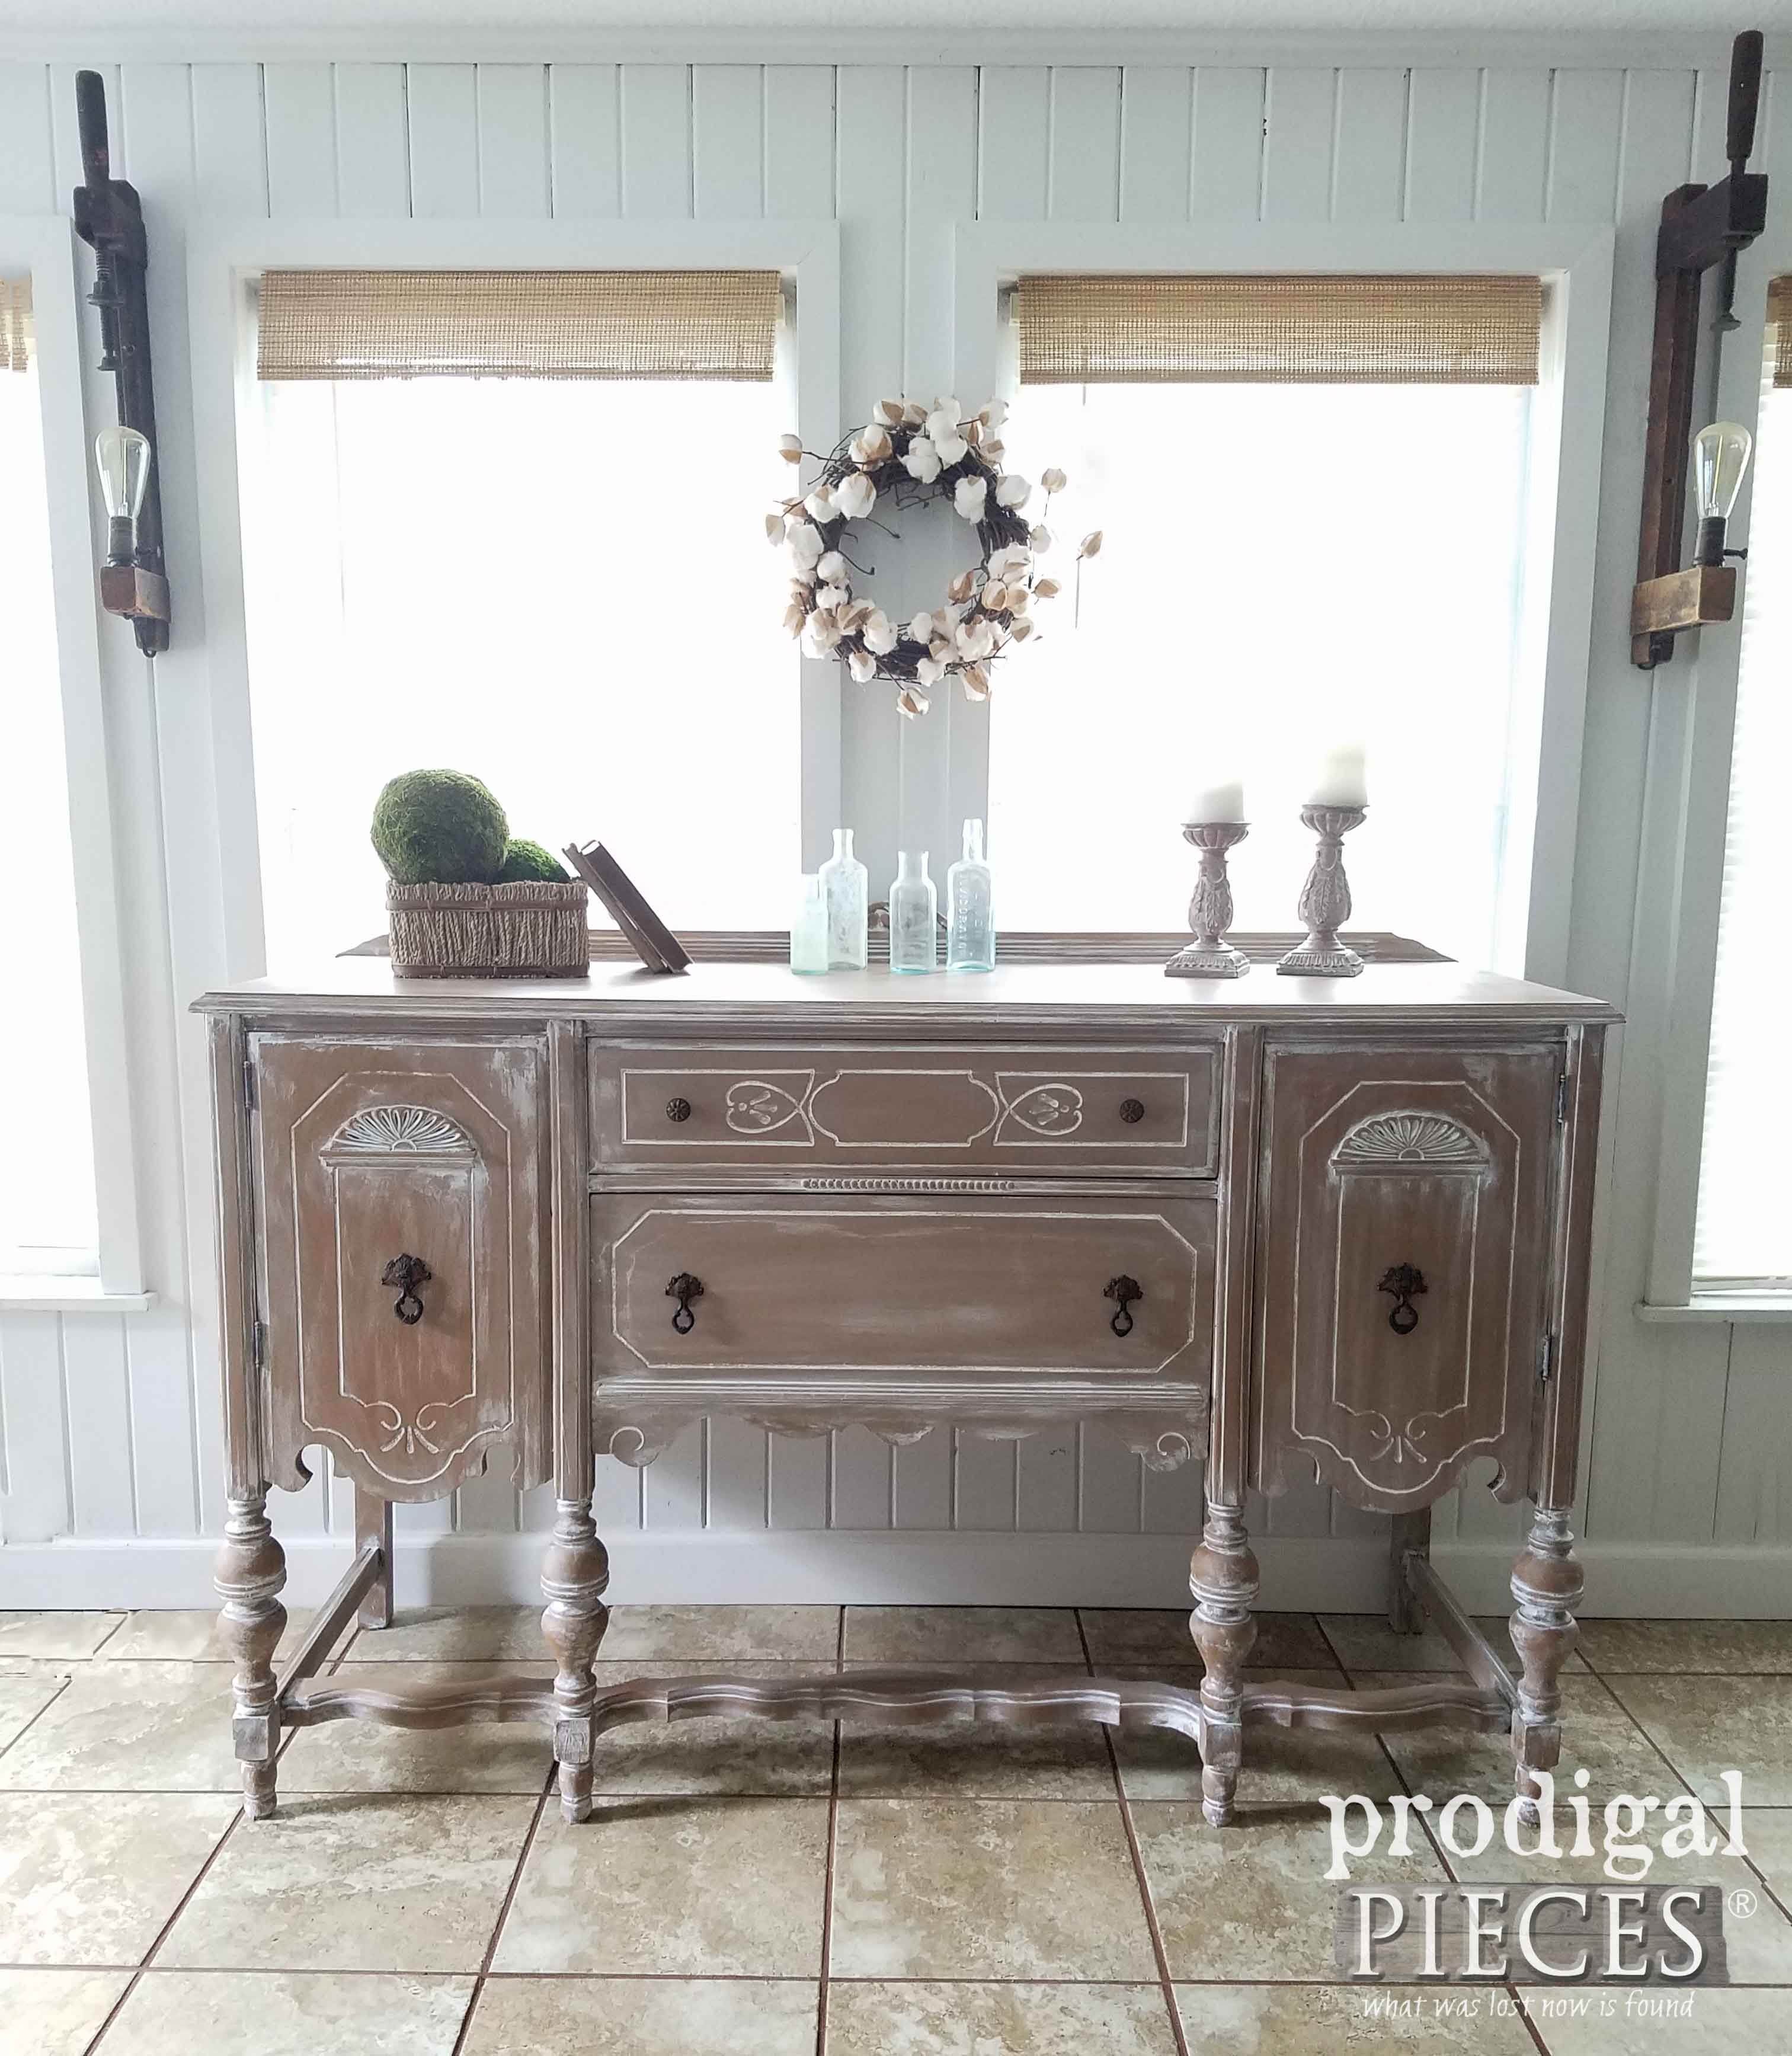 Farmhouse Style Antique Buffet with Glazing by Prodigal Pieces | prodigalpieces.com